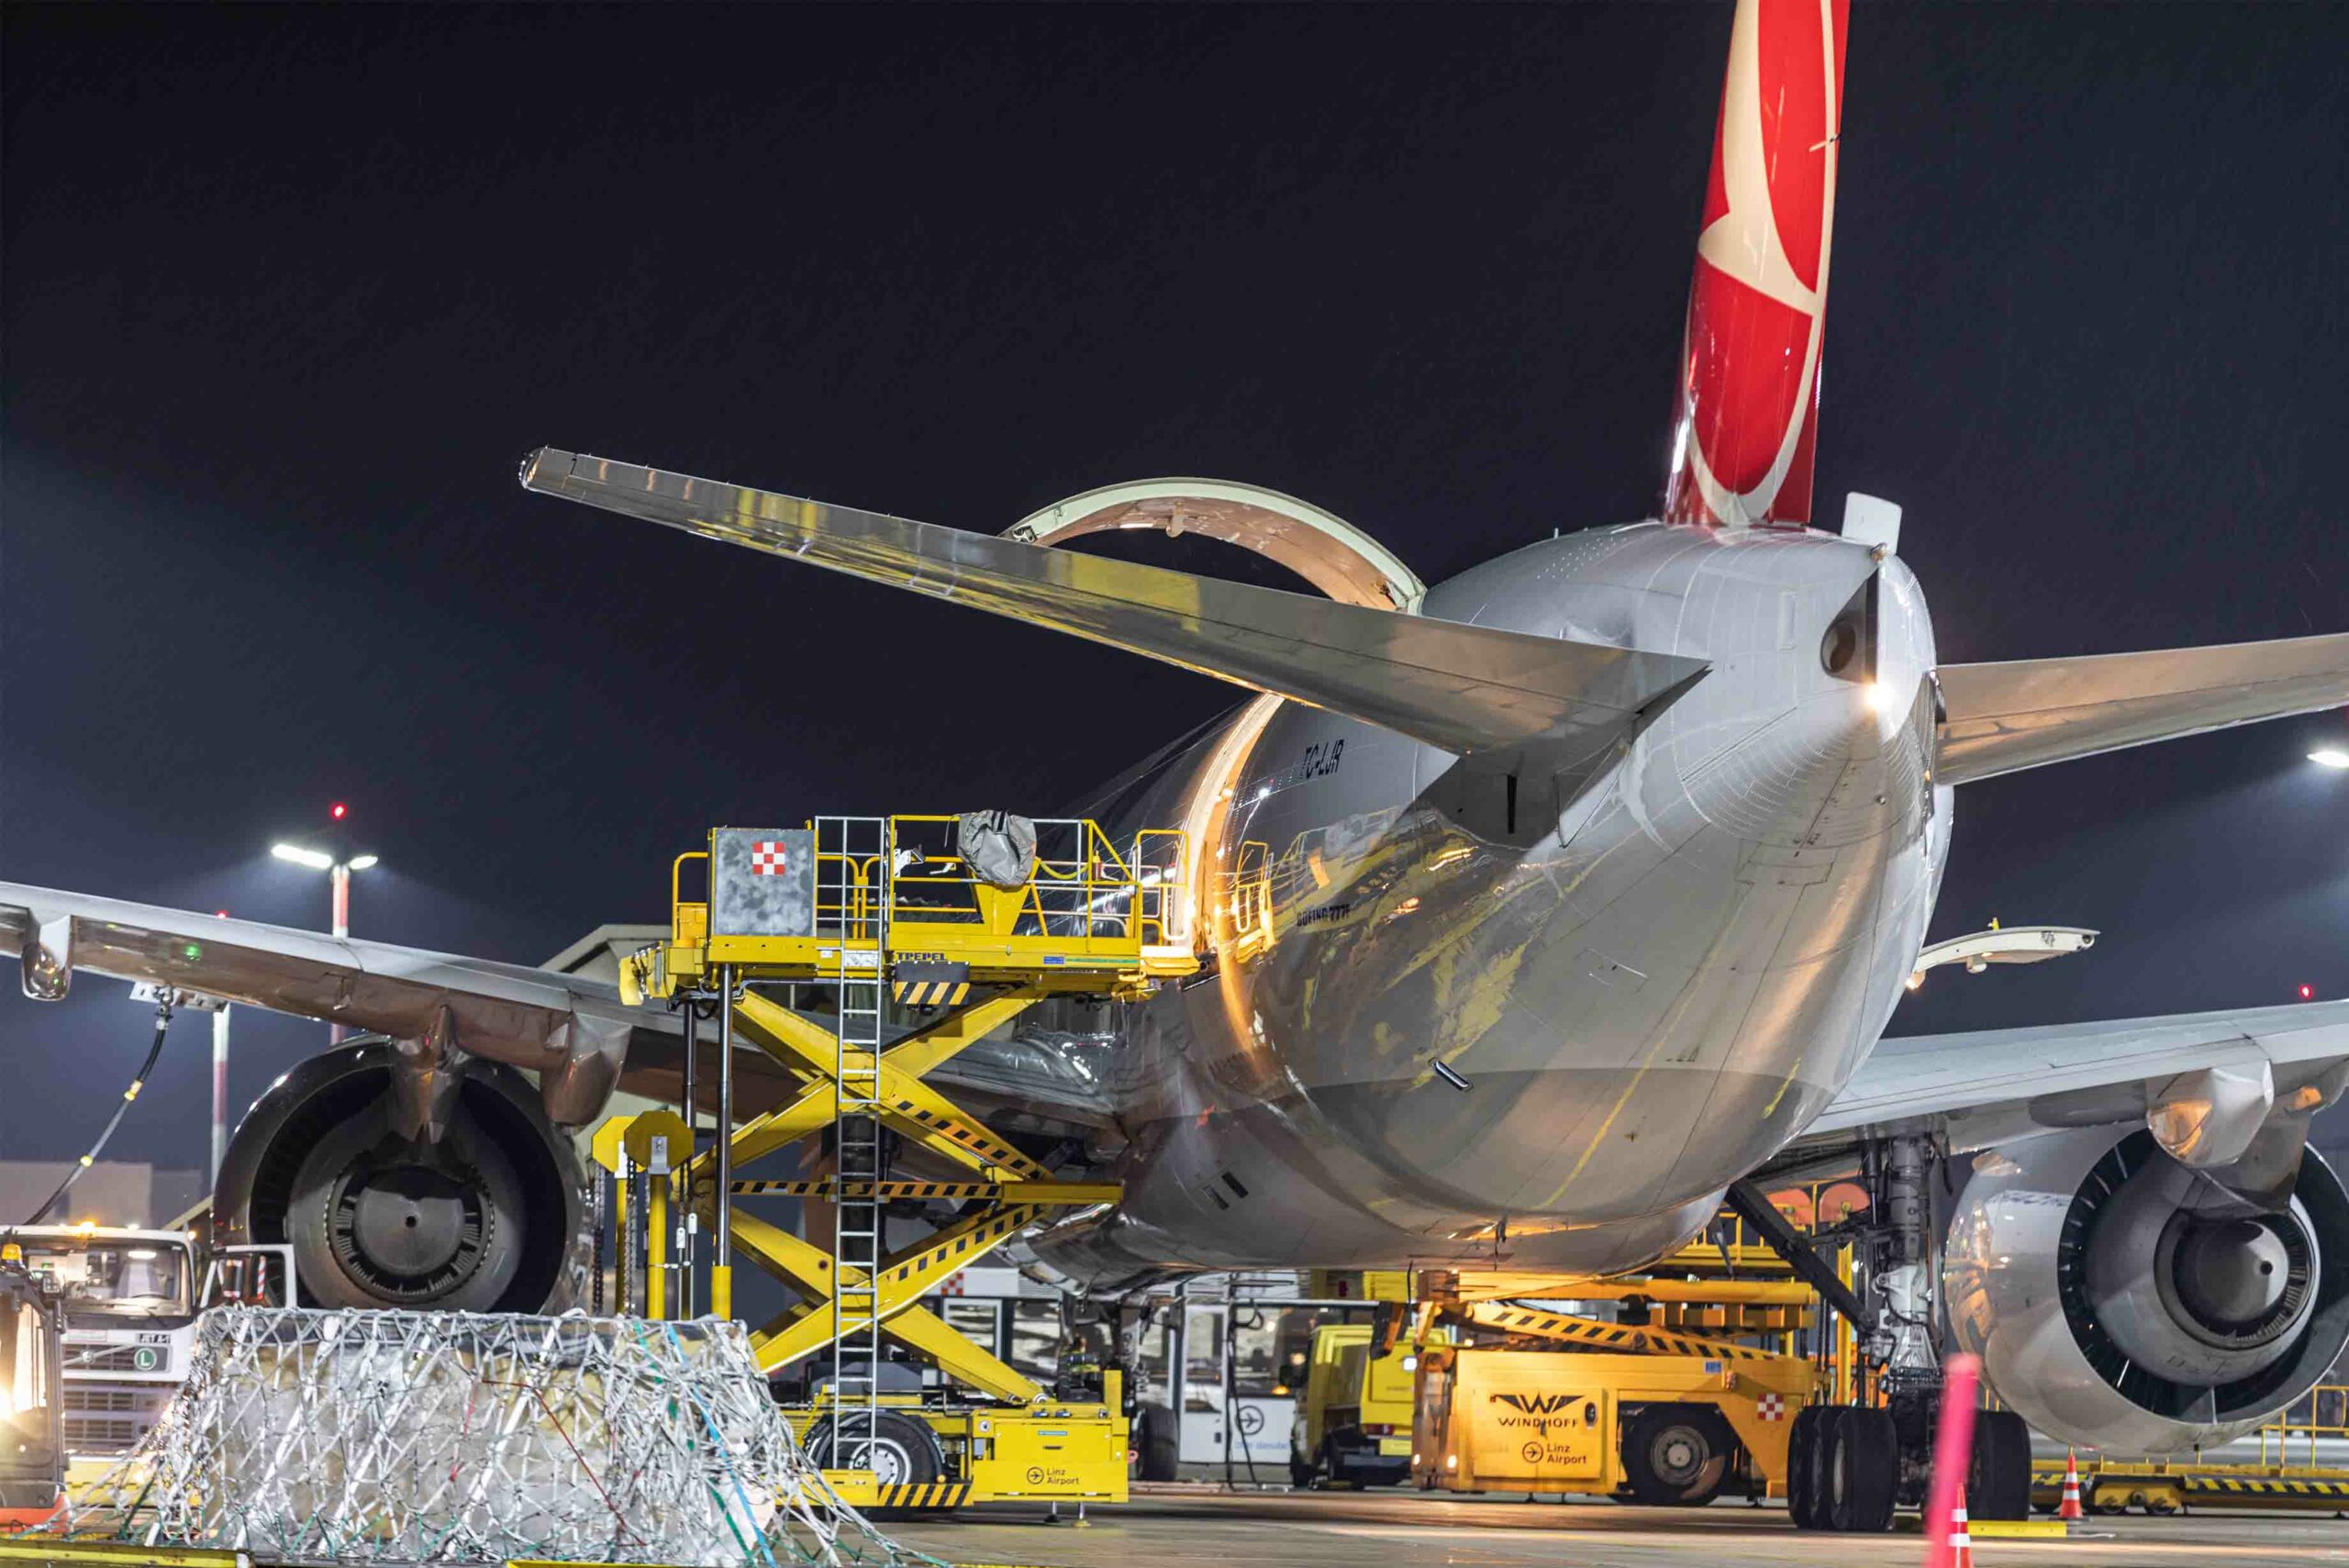 Turkish Cargo awarded with ‘Air Cargo Excellence’ by WOF EXPO Atlas Logistic NEtwork